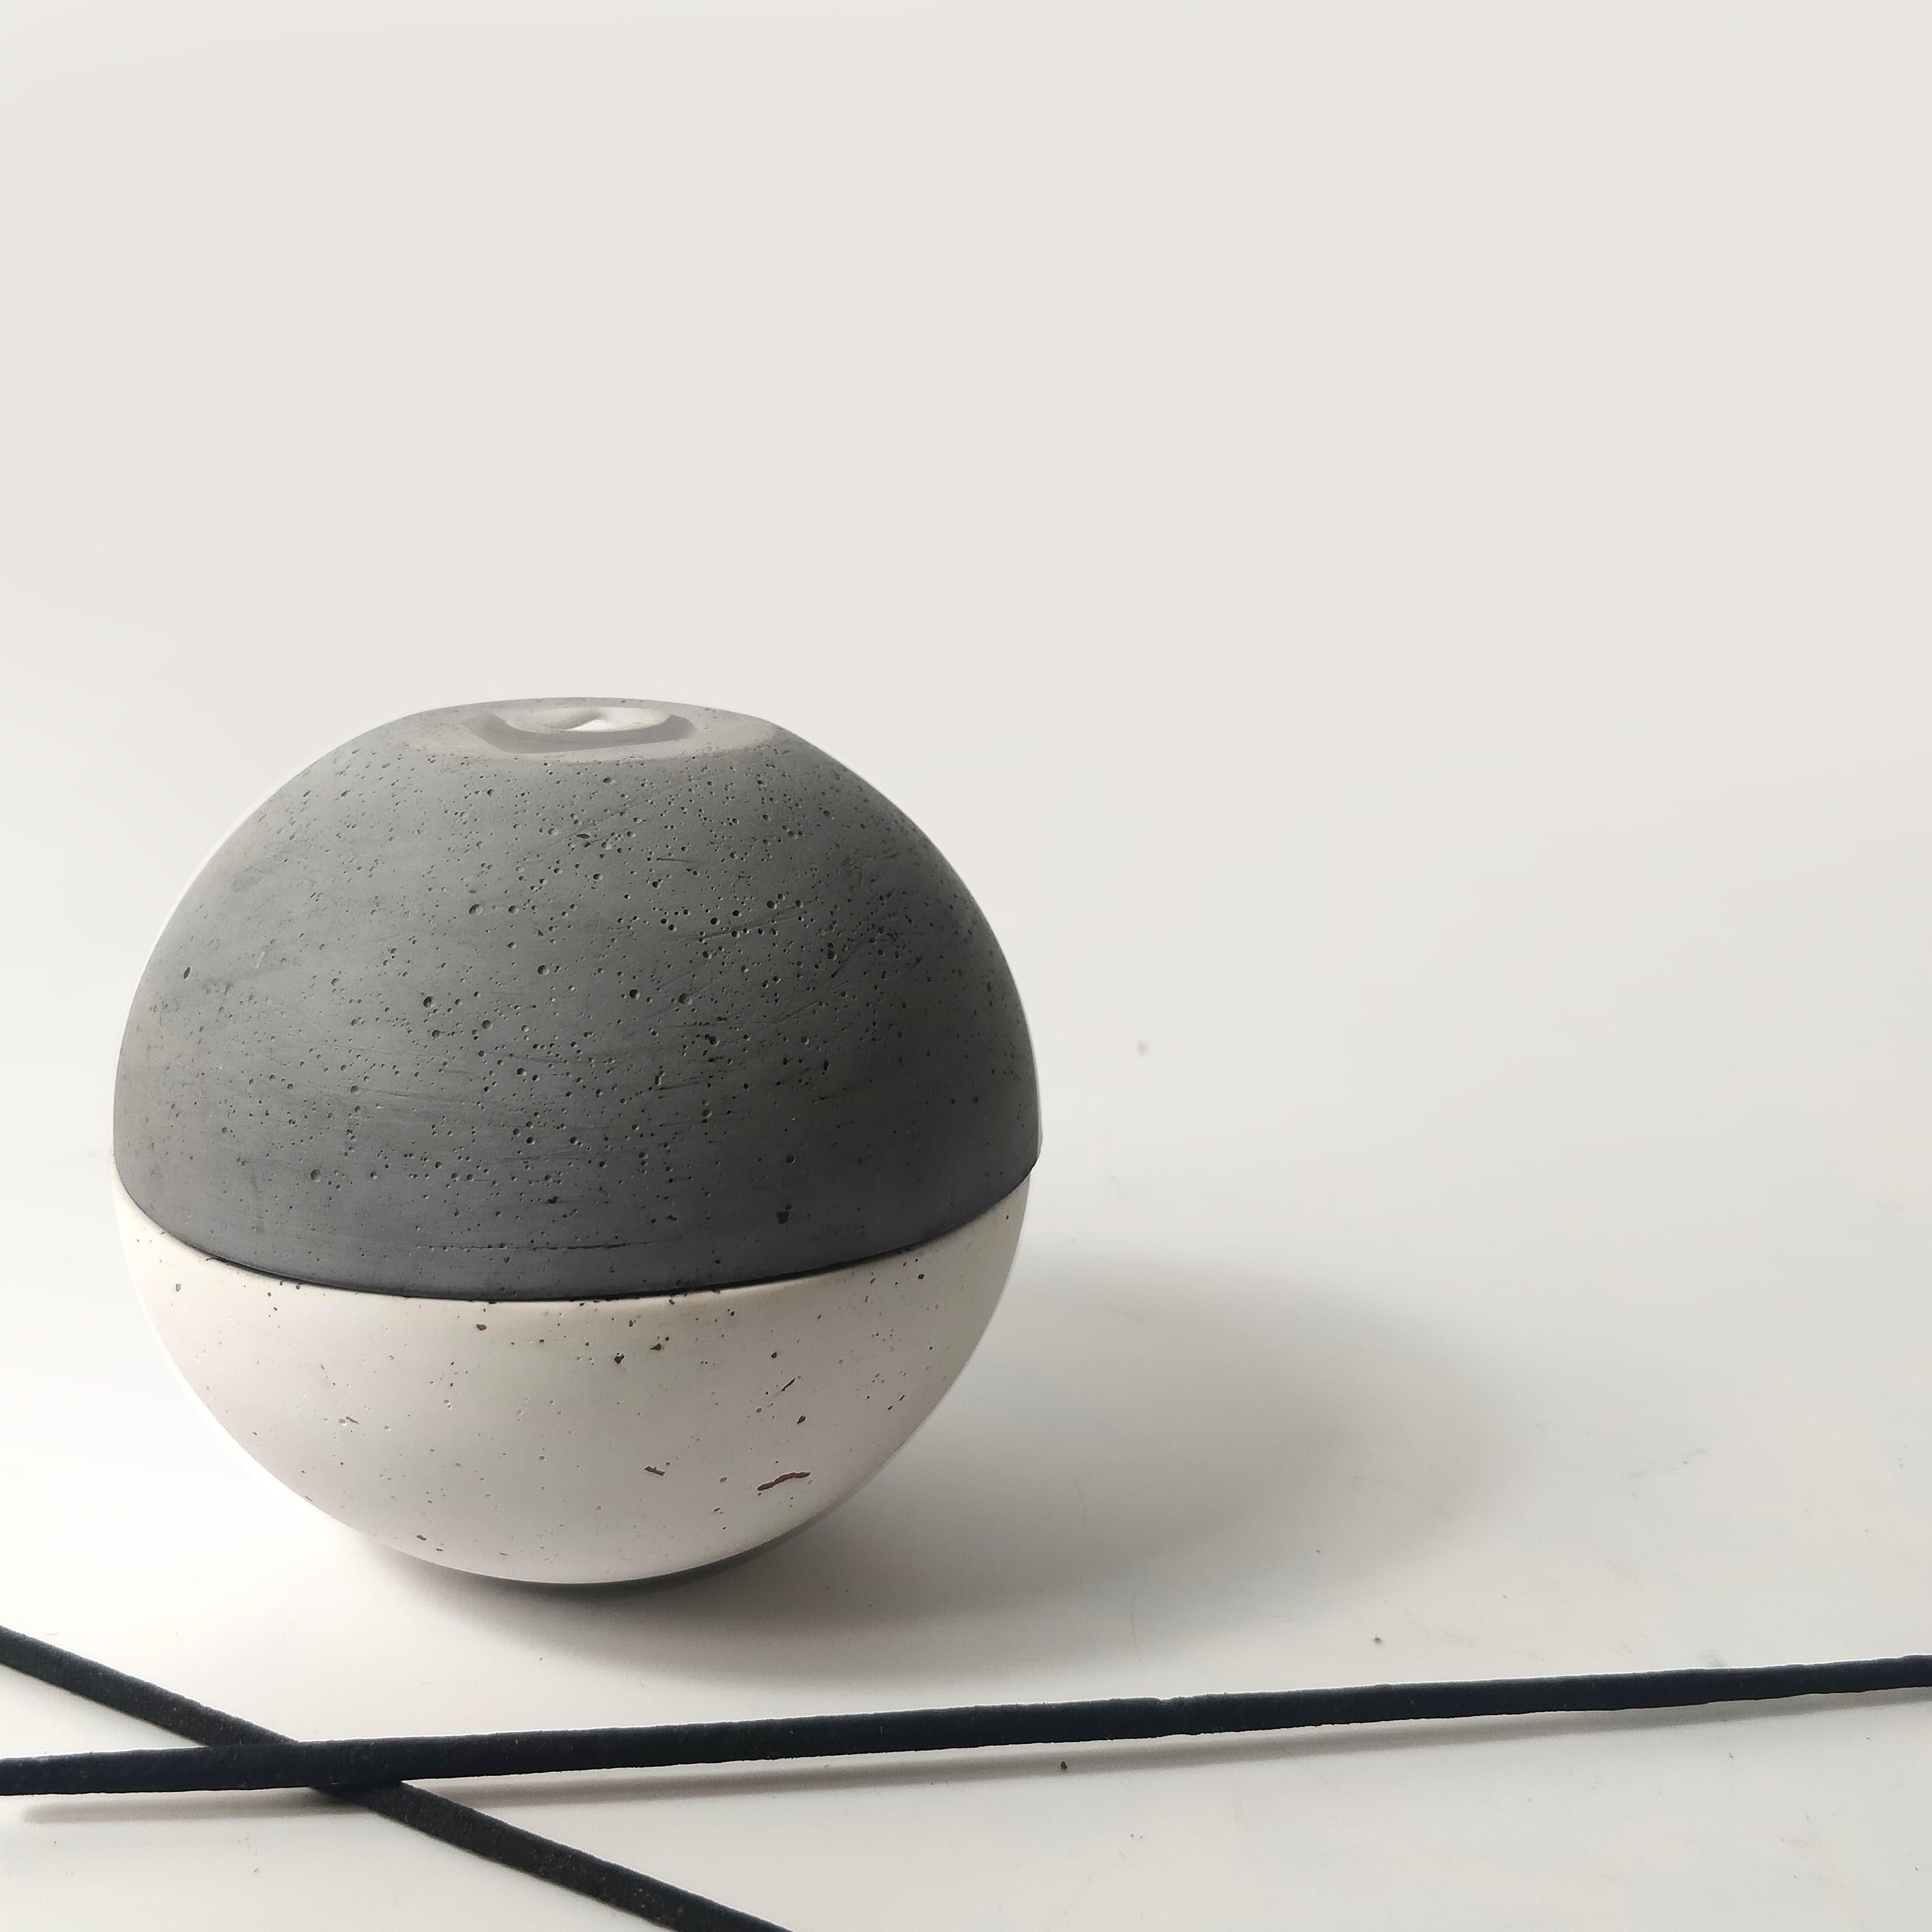 Introducing the Loona Incense Holder: A Lunar-Inspired Organic Accent by Louis

Discover the allure of our Loona Incense Holder, expertly designed by product designer Louis, and inspired by the captivating shape of the moon. Crafted from concrete,